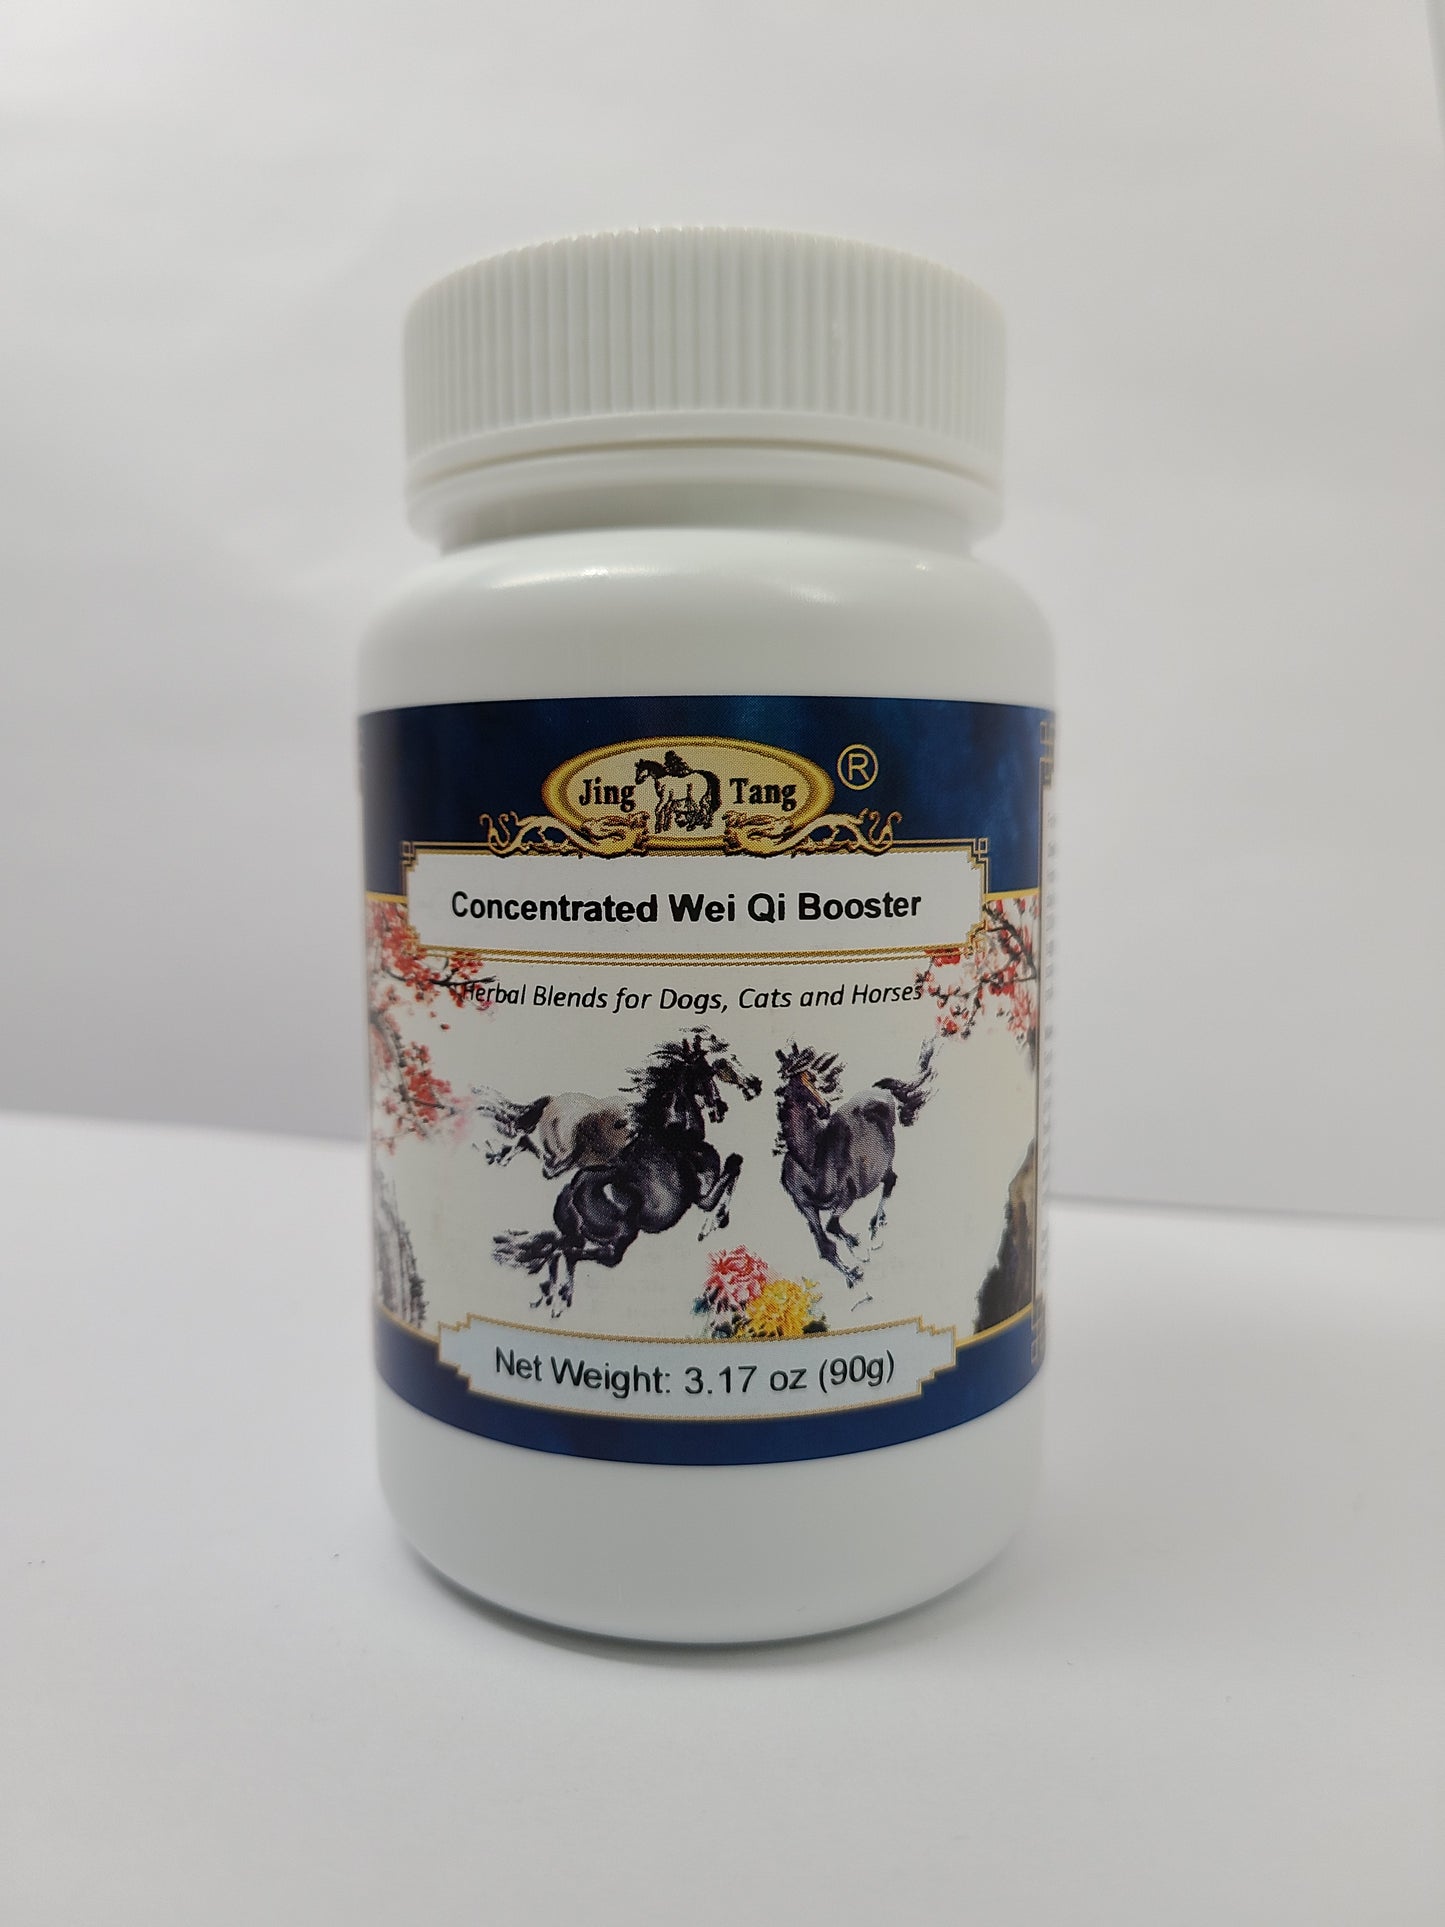 Jing Tang Herbals: Concentrated Wei Qi Booster 90g powder (1 bottle)